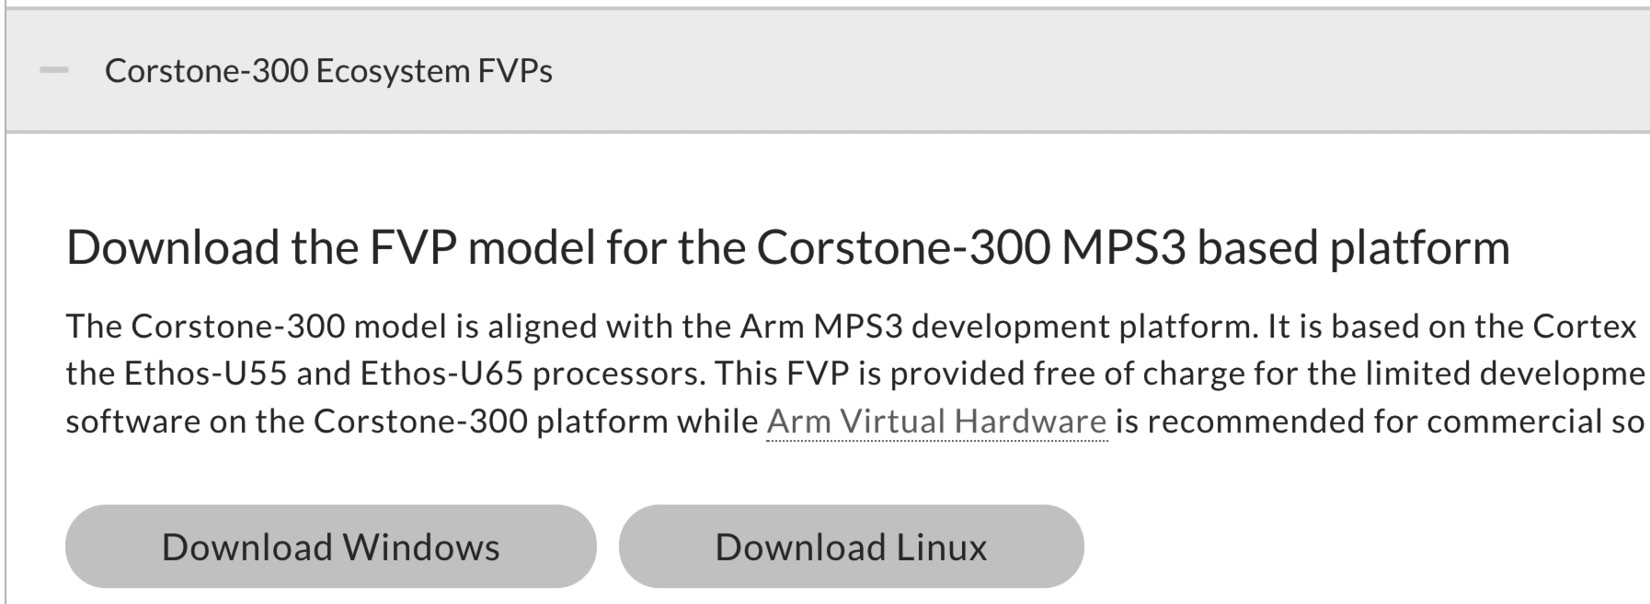 Figure 8.4 – Download Linux button for Corstone-300 FVP
